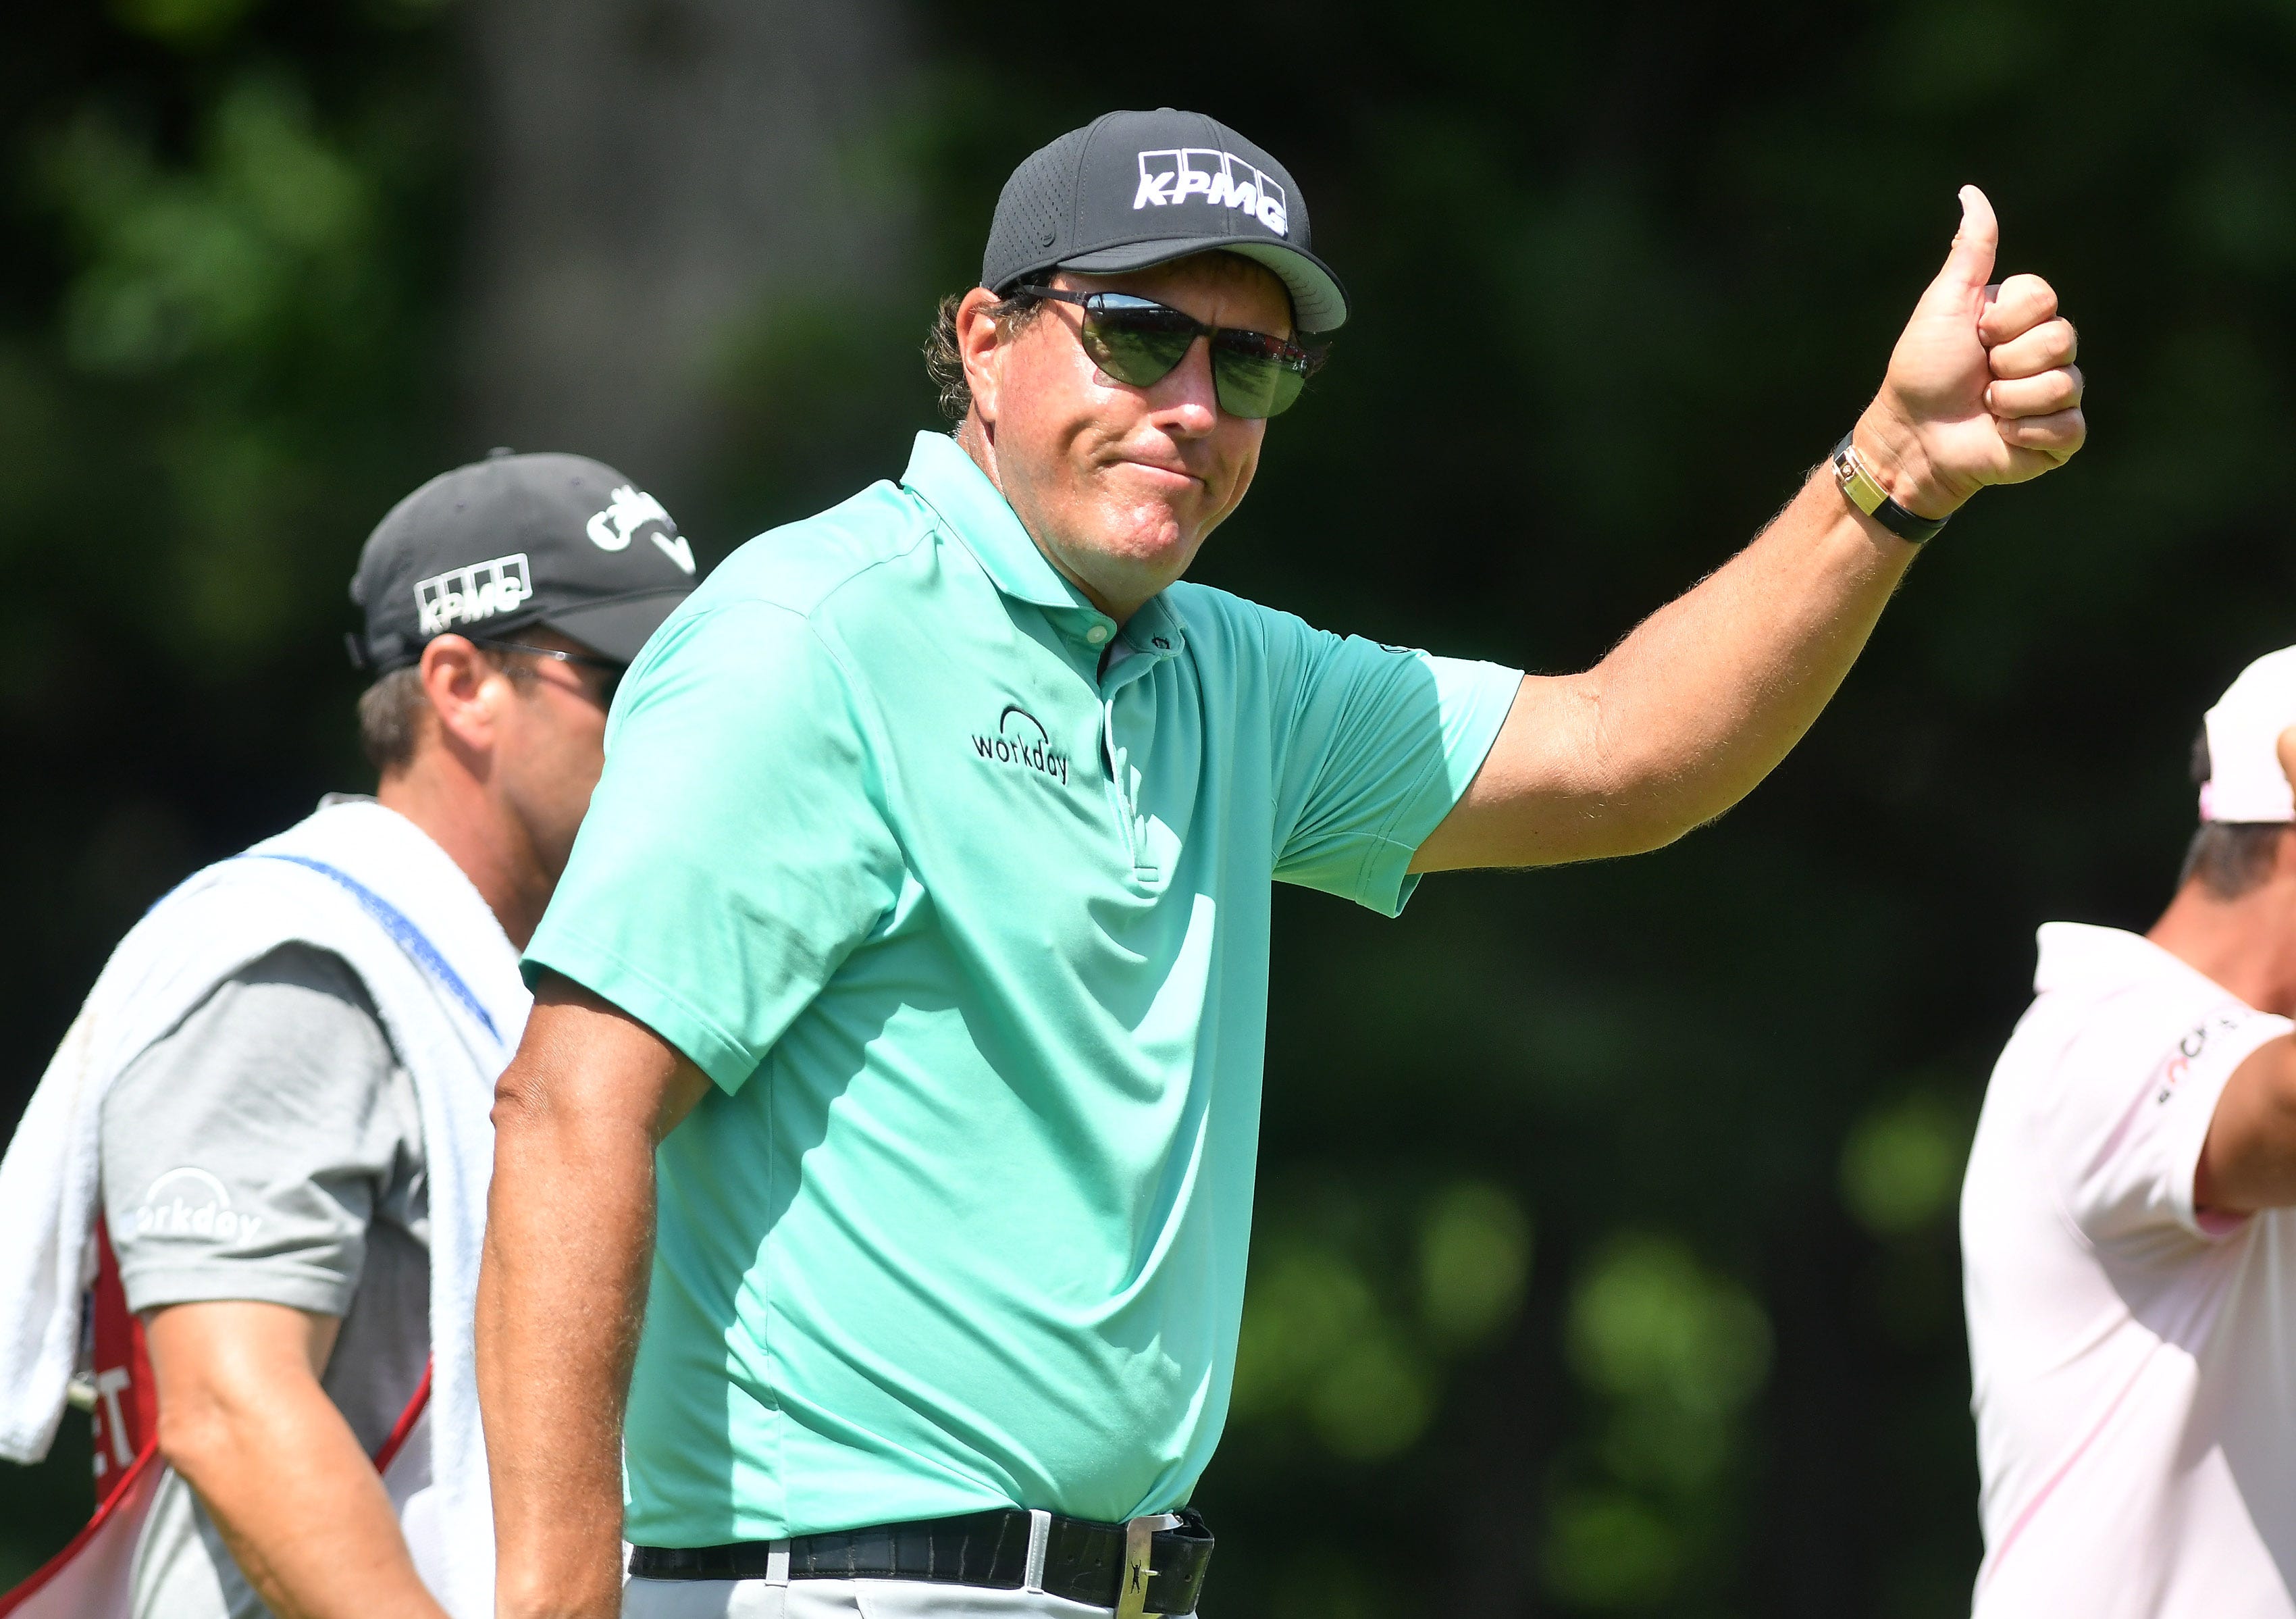 Phil Mickelson gives a thumbs up to the fans after finishing his round on the ninth green during Round 1 of the Rocket Mortgage Classic at the Detroit Golf Club on July 1, 2021.